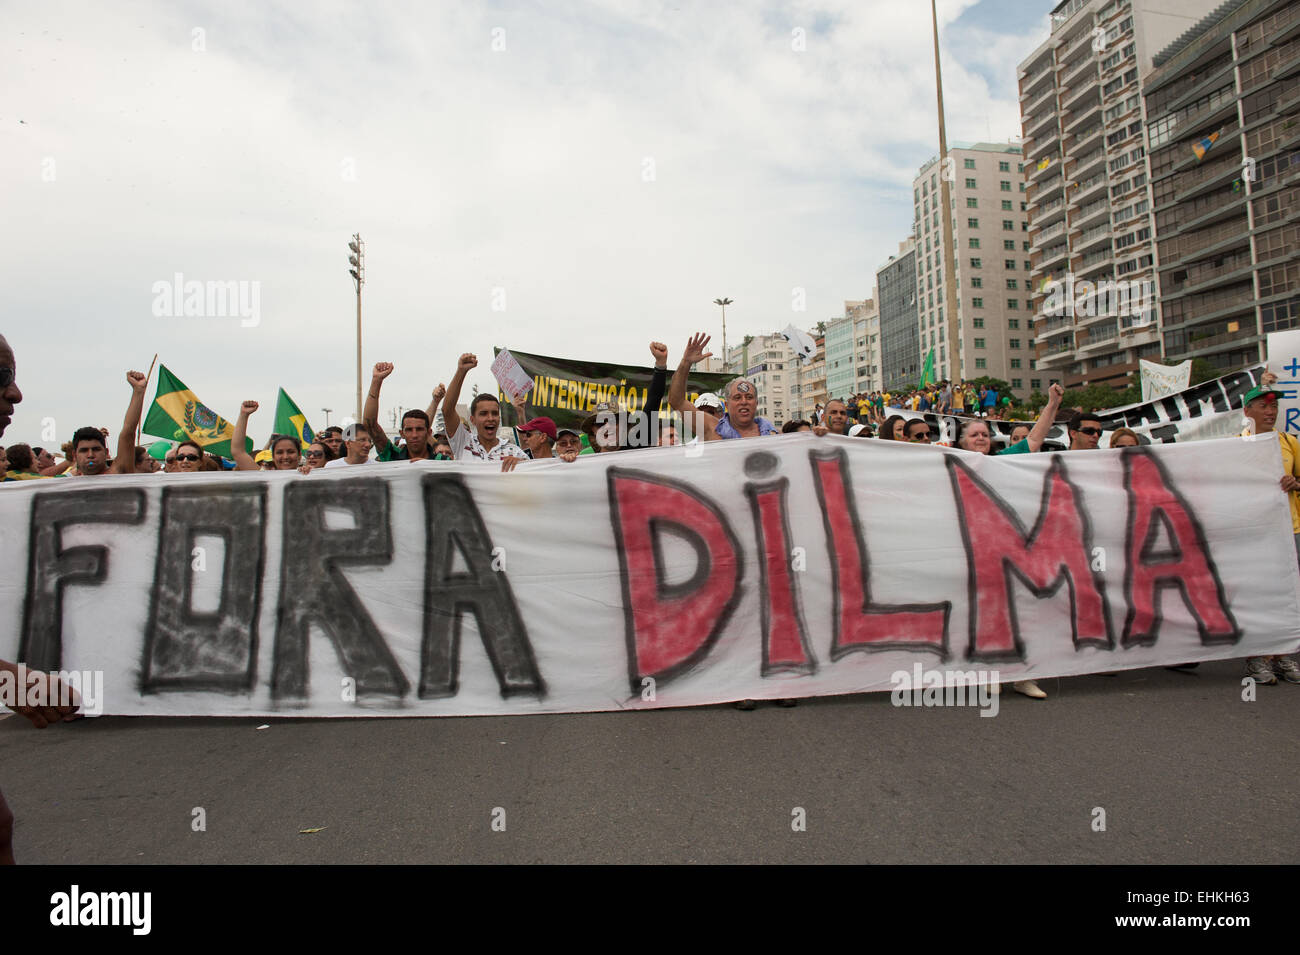 Protesters carry a banner with 'FORA DILMA' (Dilma Out). Rio de Janeiro, Brazil, 15th March 2015. Popular demonstration against the President, Dilma Rousseff in Copacabana. Photo © Sue Cunningham sue@scphotographic.com. Stock Photo